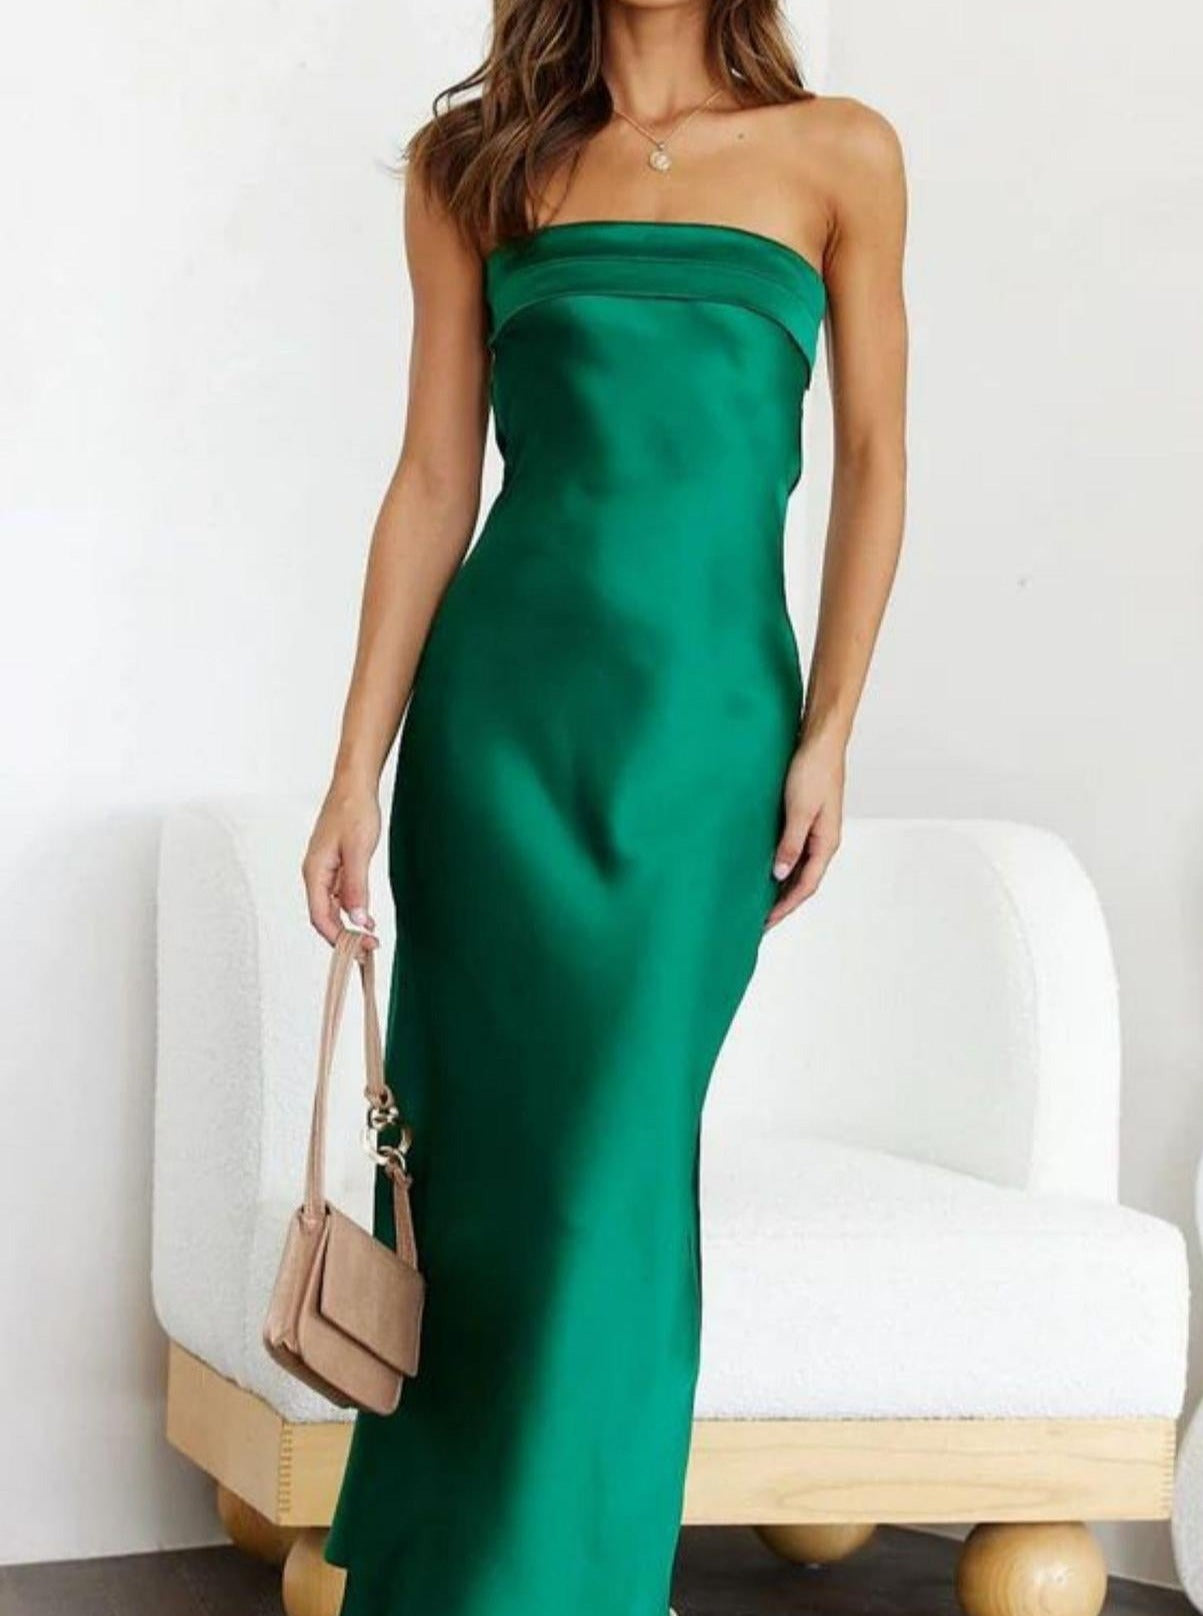 Sexy Solid Color Satin Tube Dress